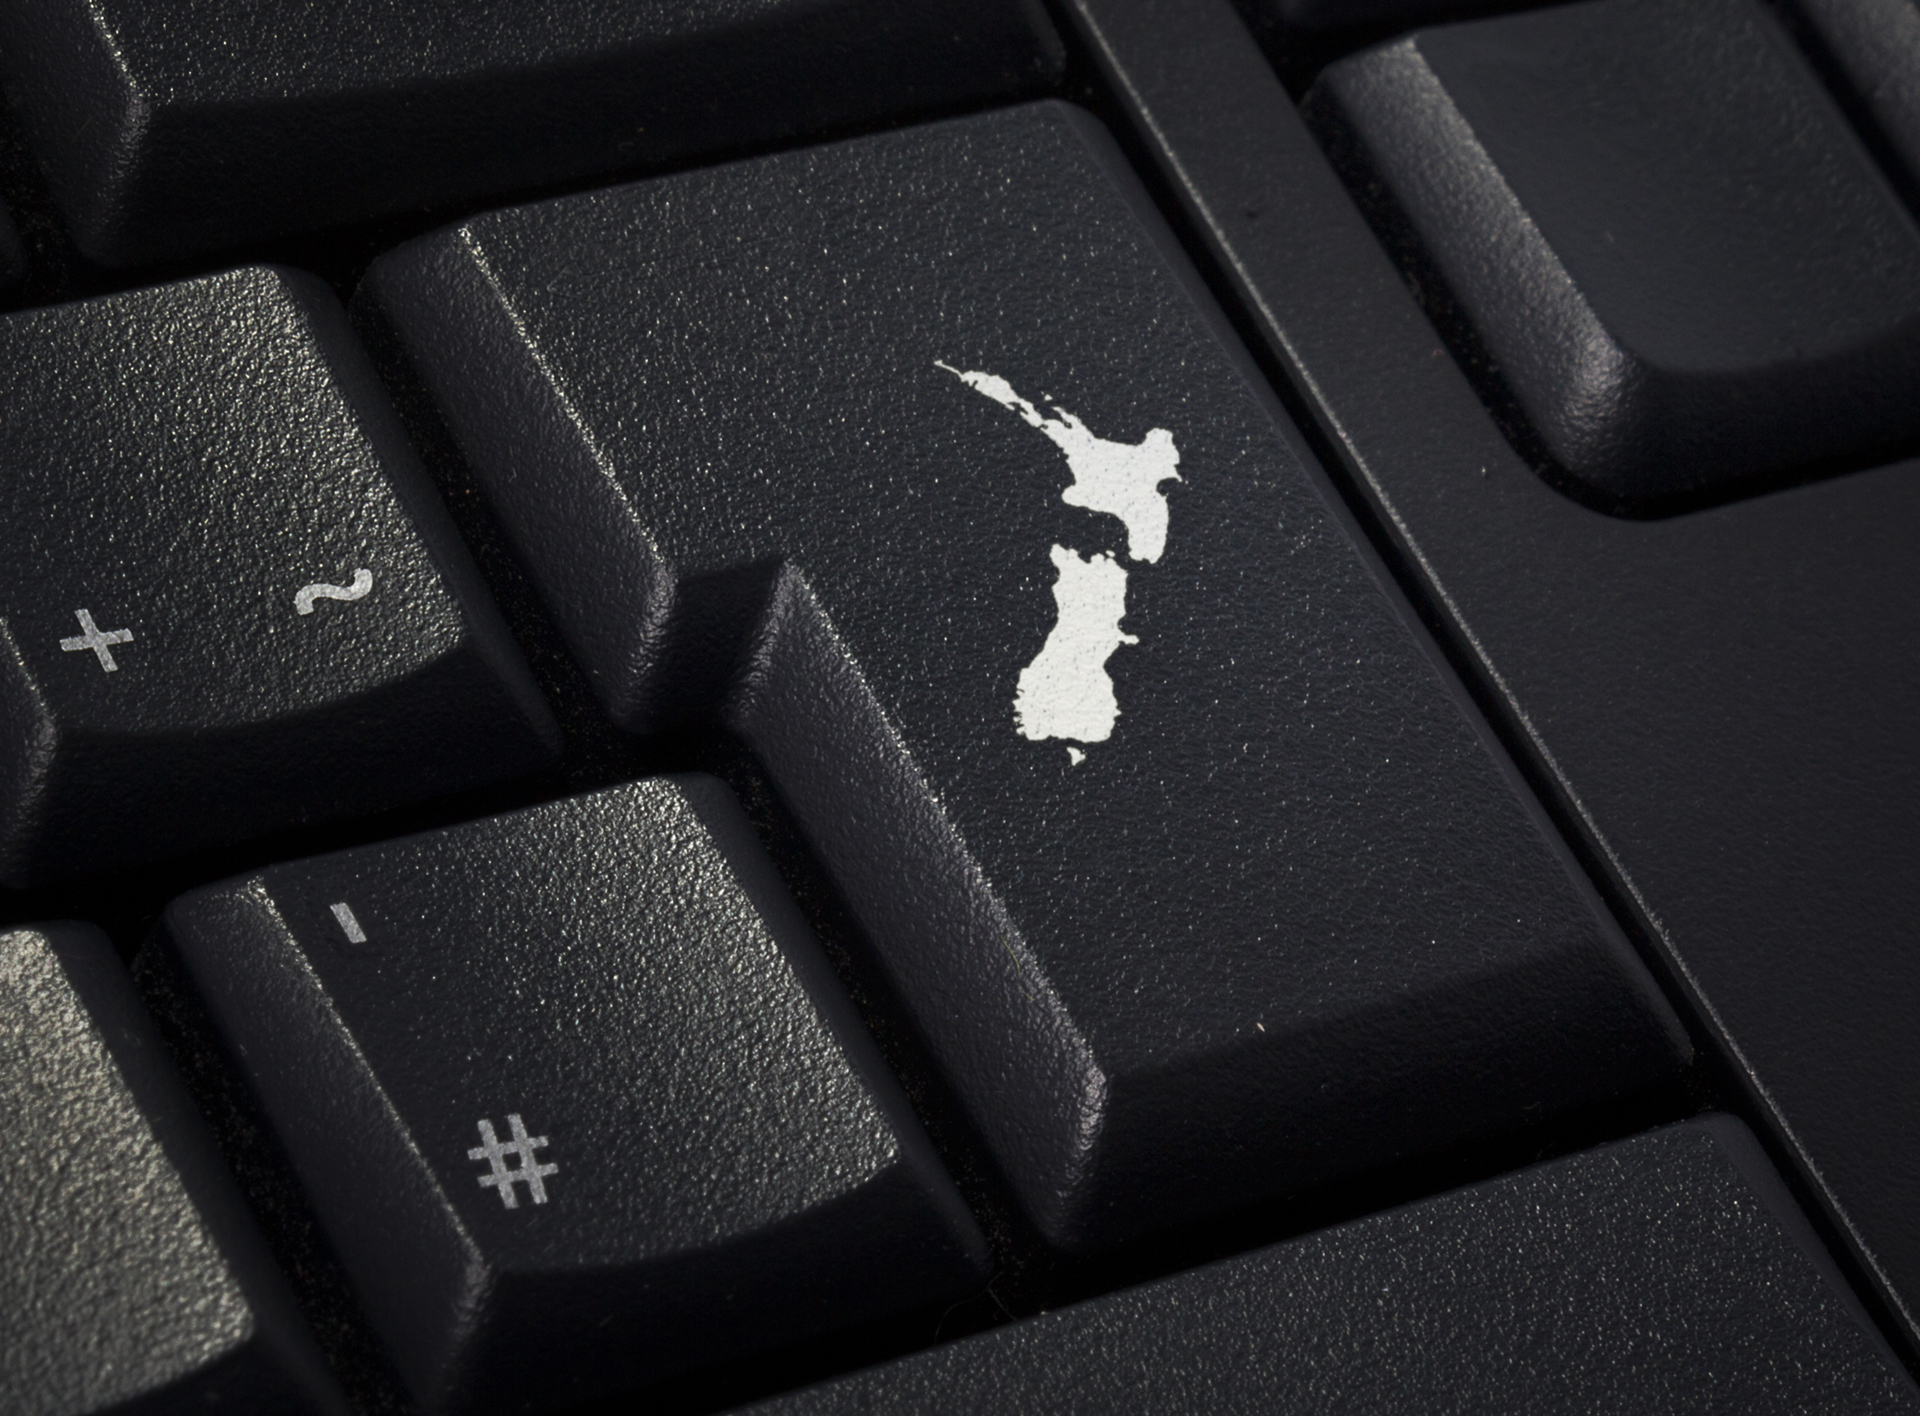 Keyboard with return key in the shape of New Zealand.(series)